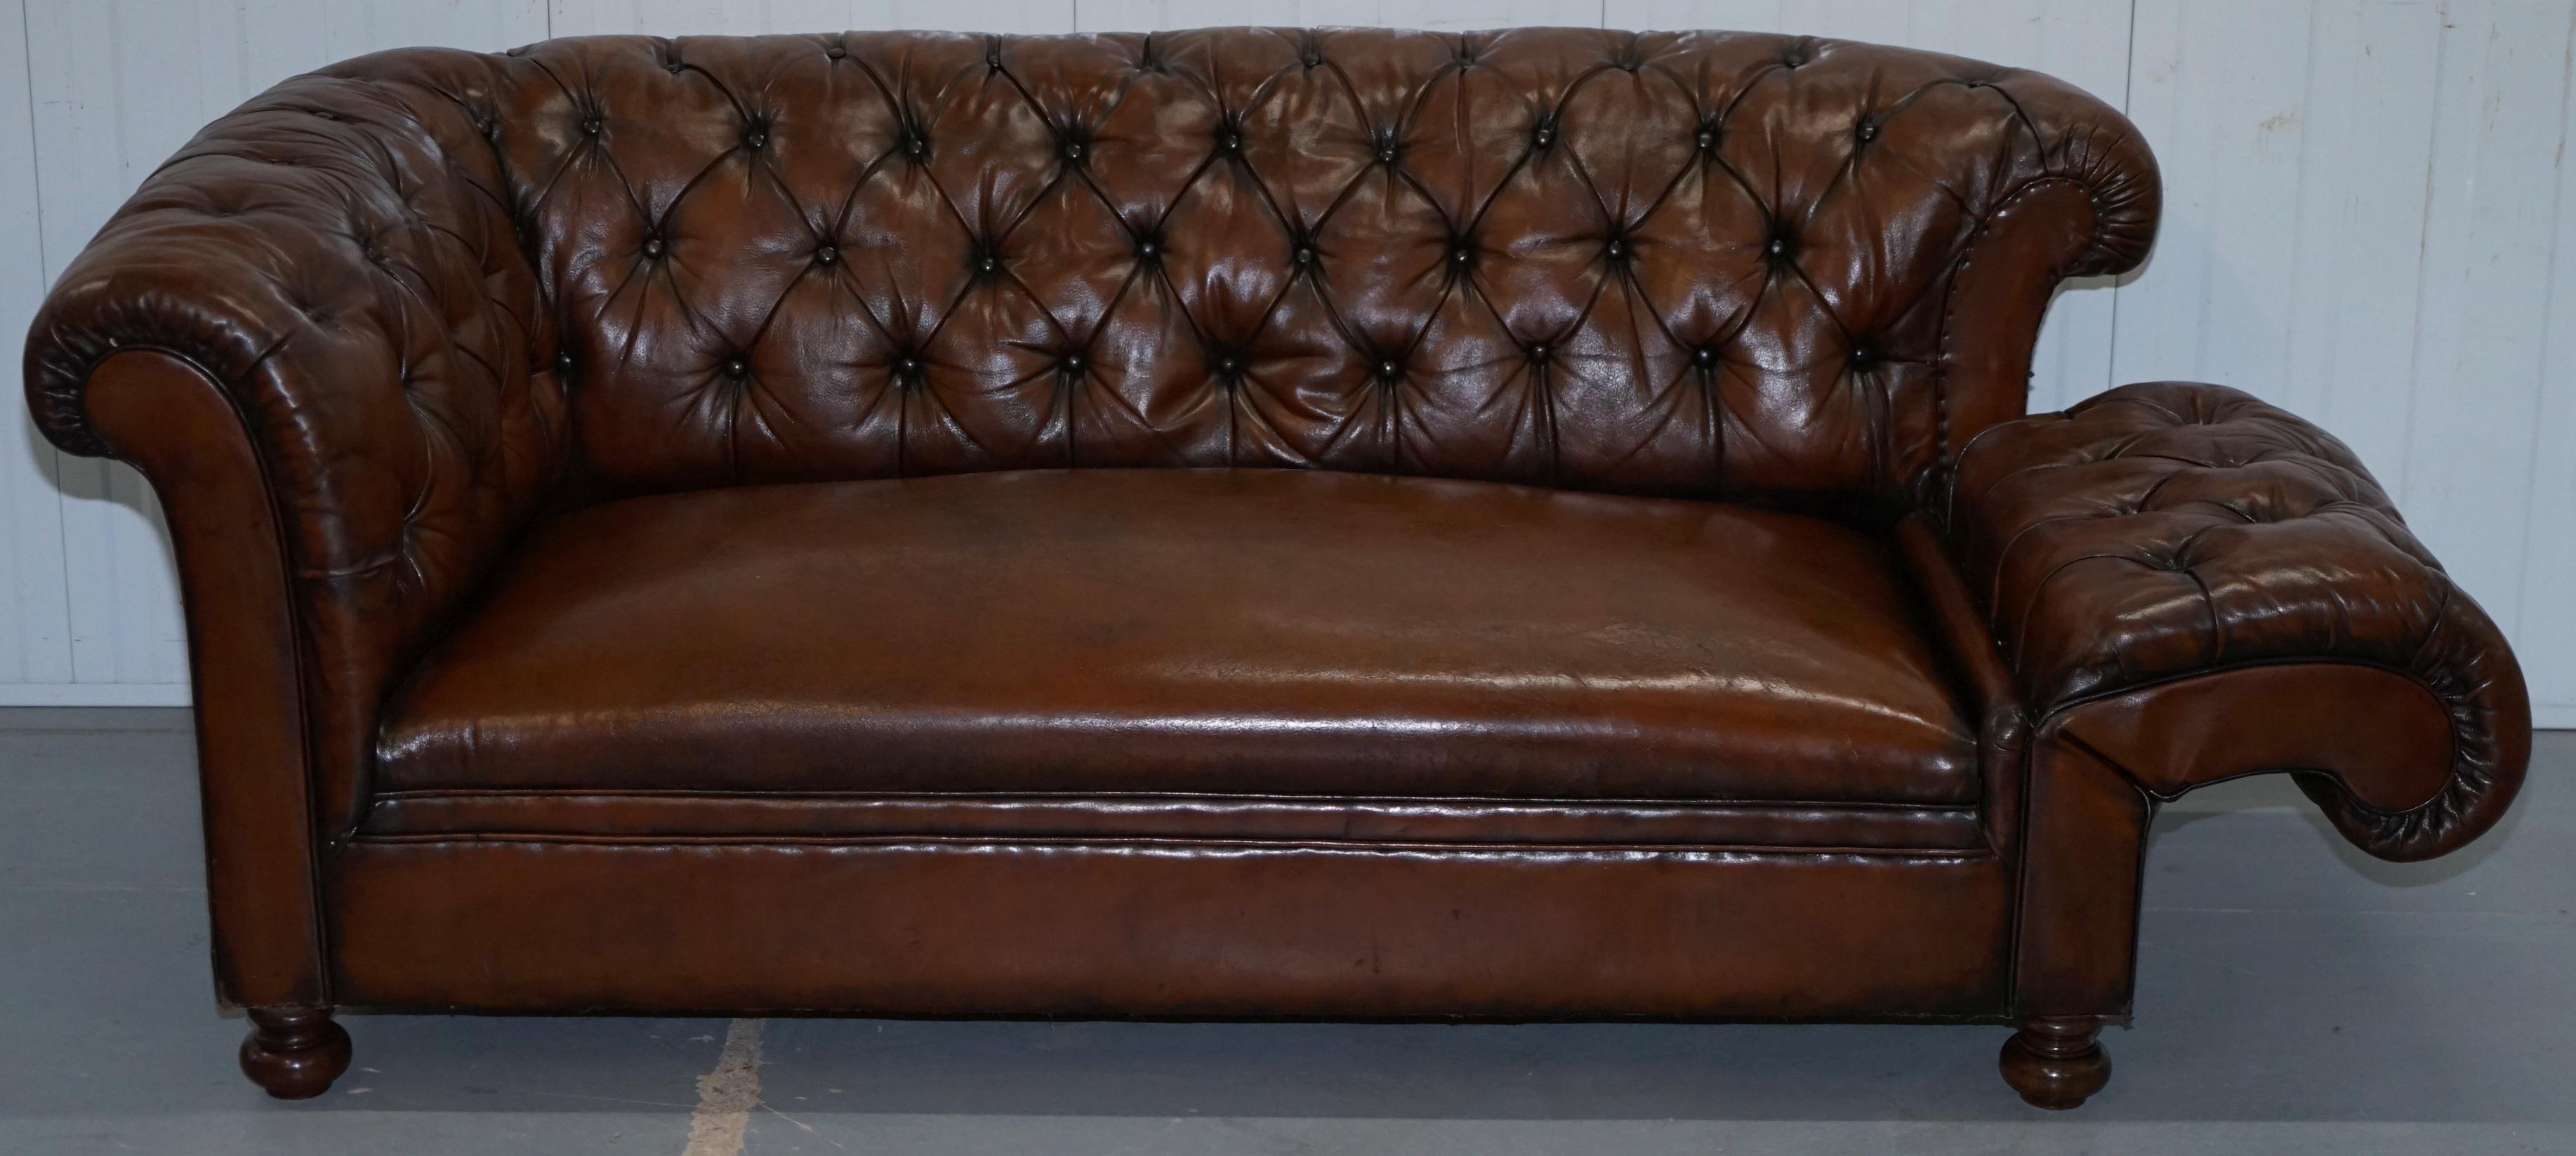 Restored Victorian Drop Arm Chesterfield Buttoned Hand Dyed Brown Leather Sofa 9